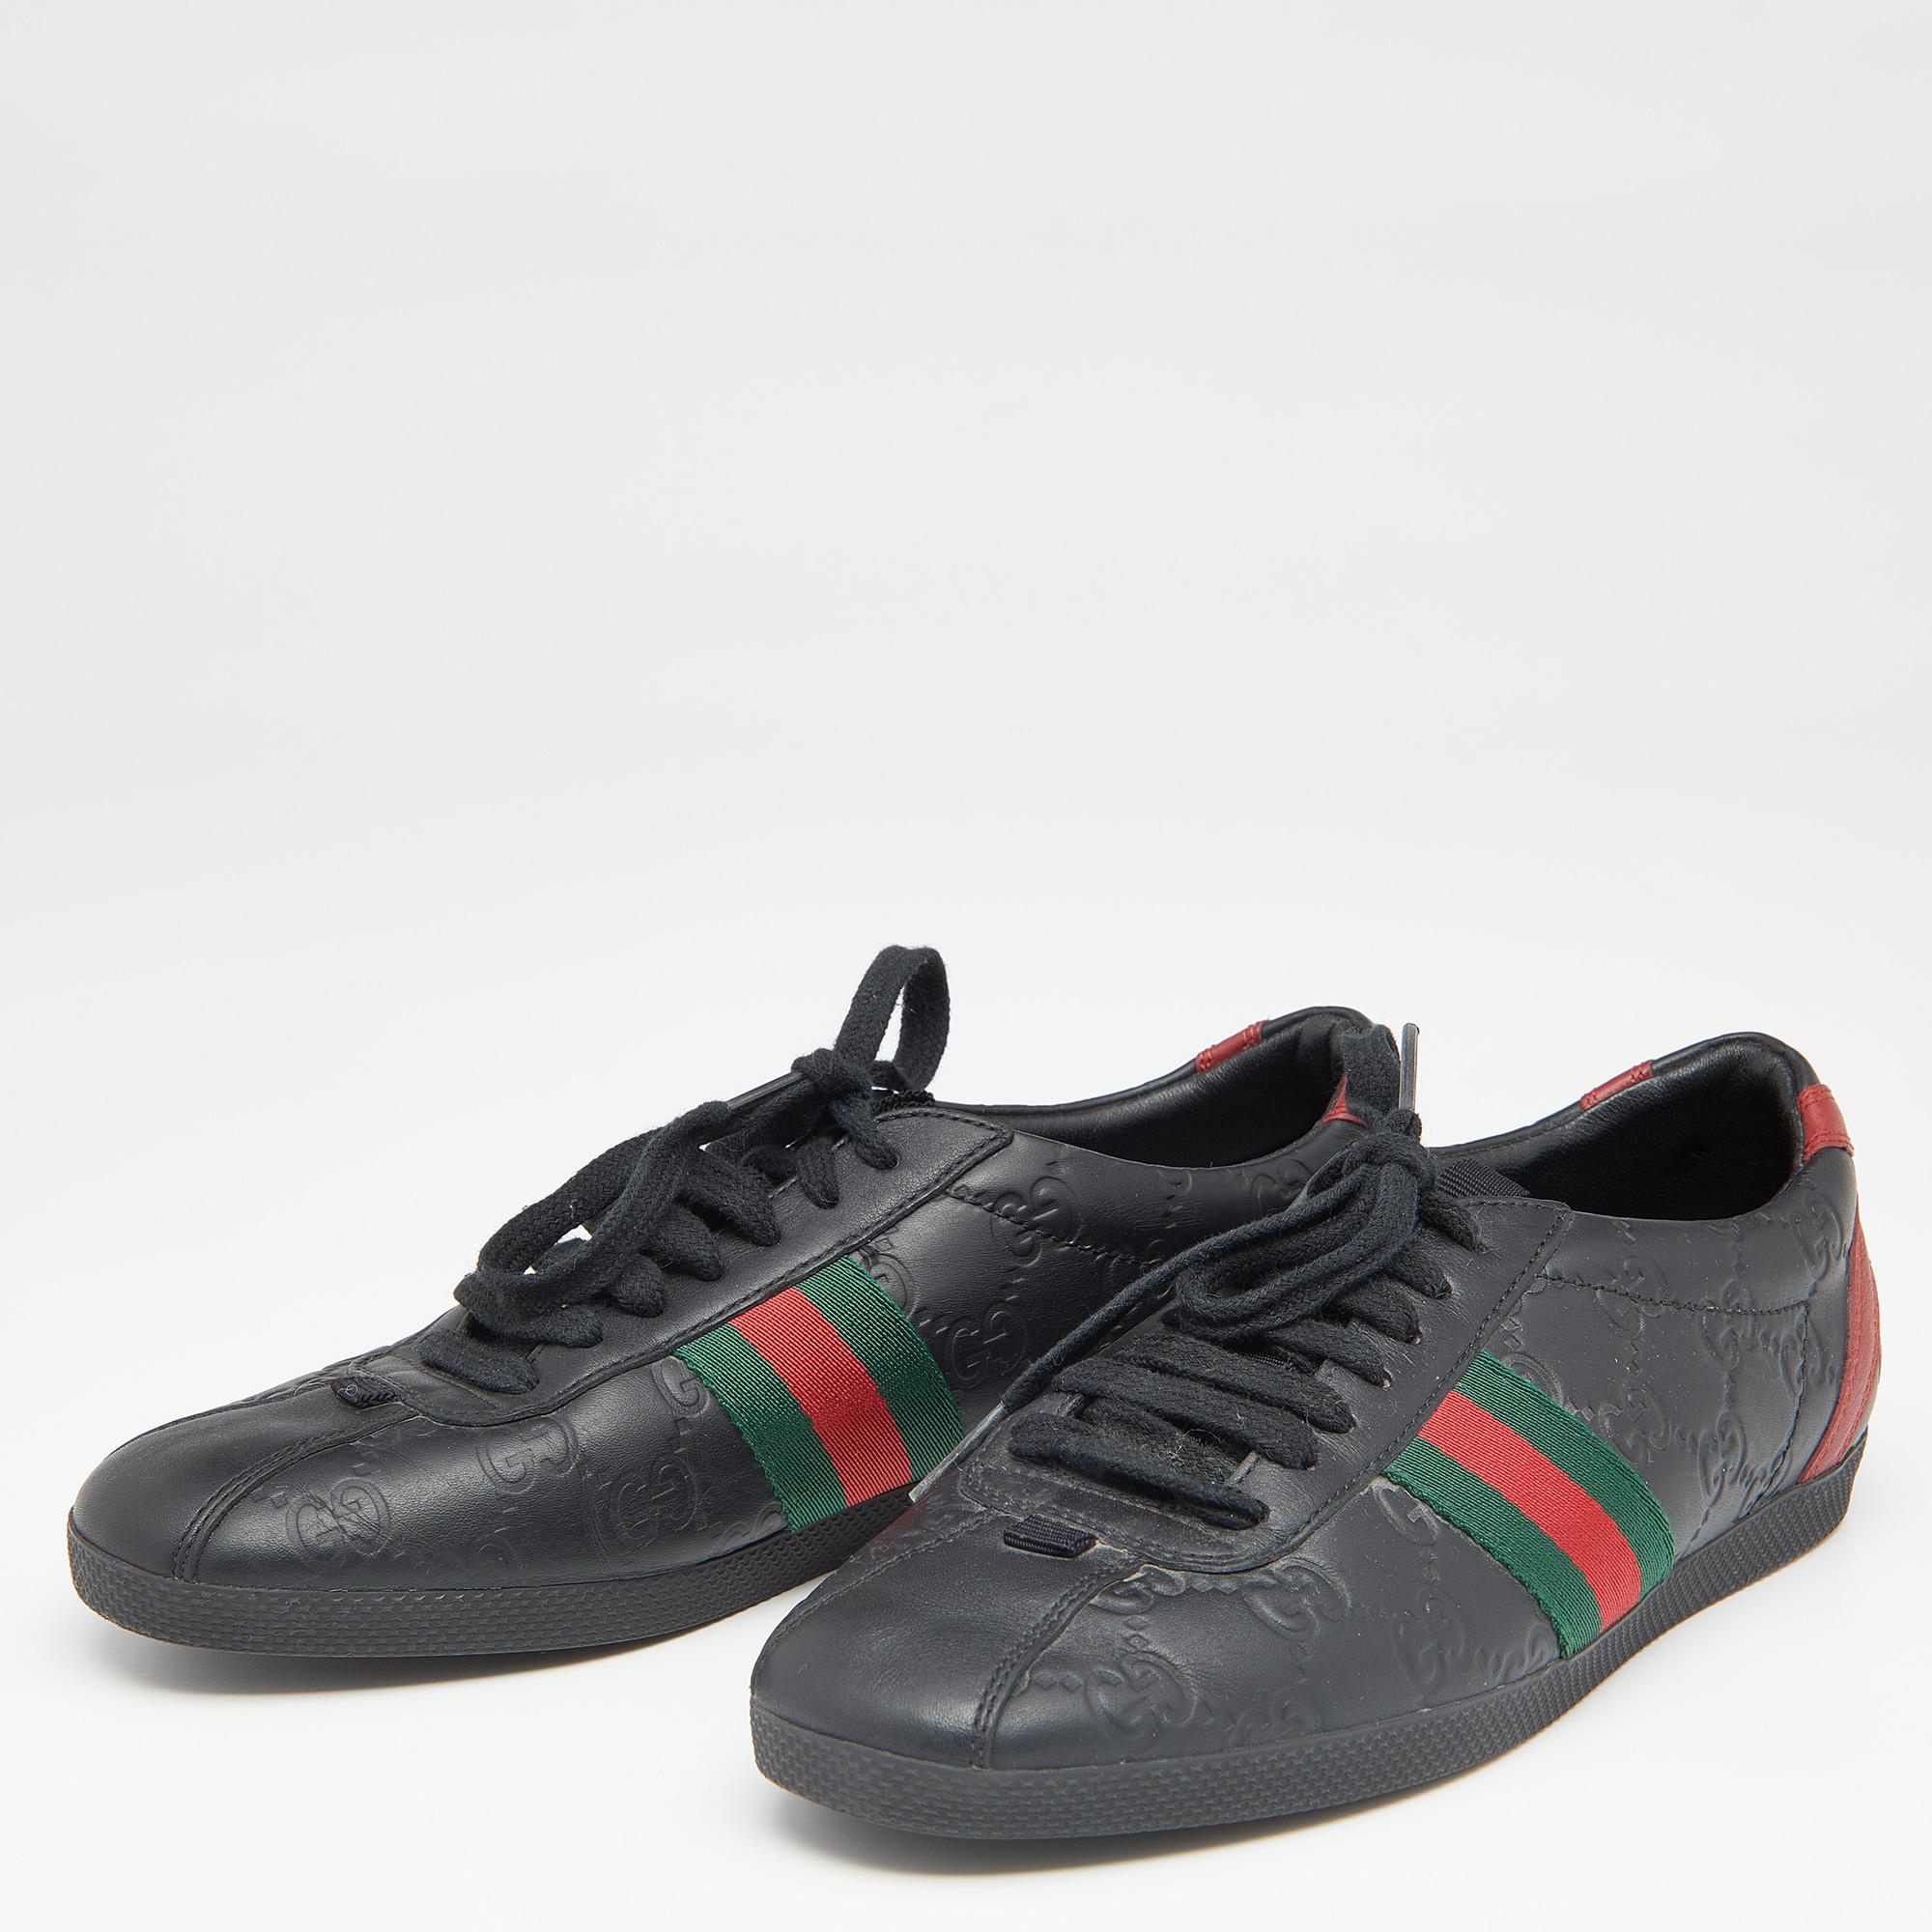 Gucci Black Guccissima Leather Web Low Top Sneakers Size 37 3